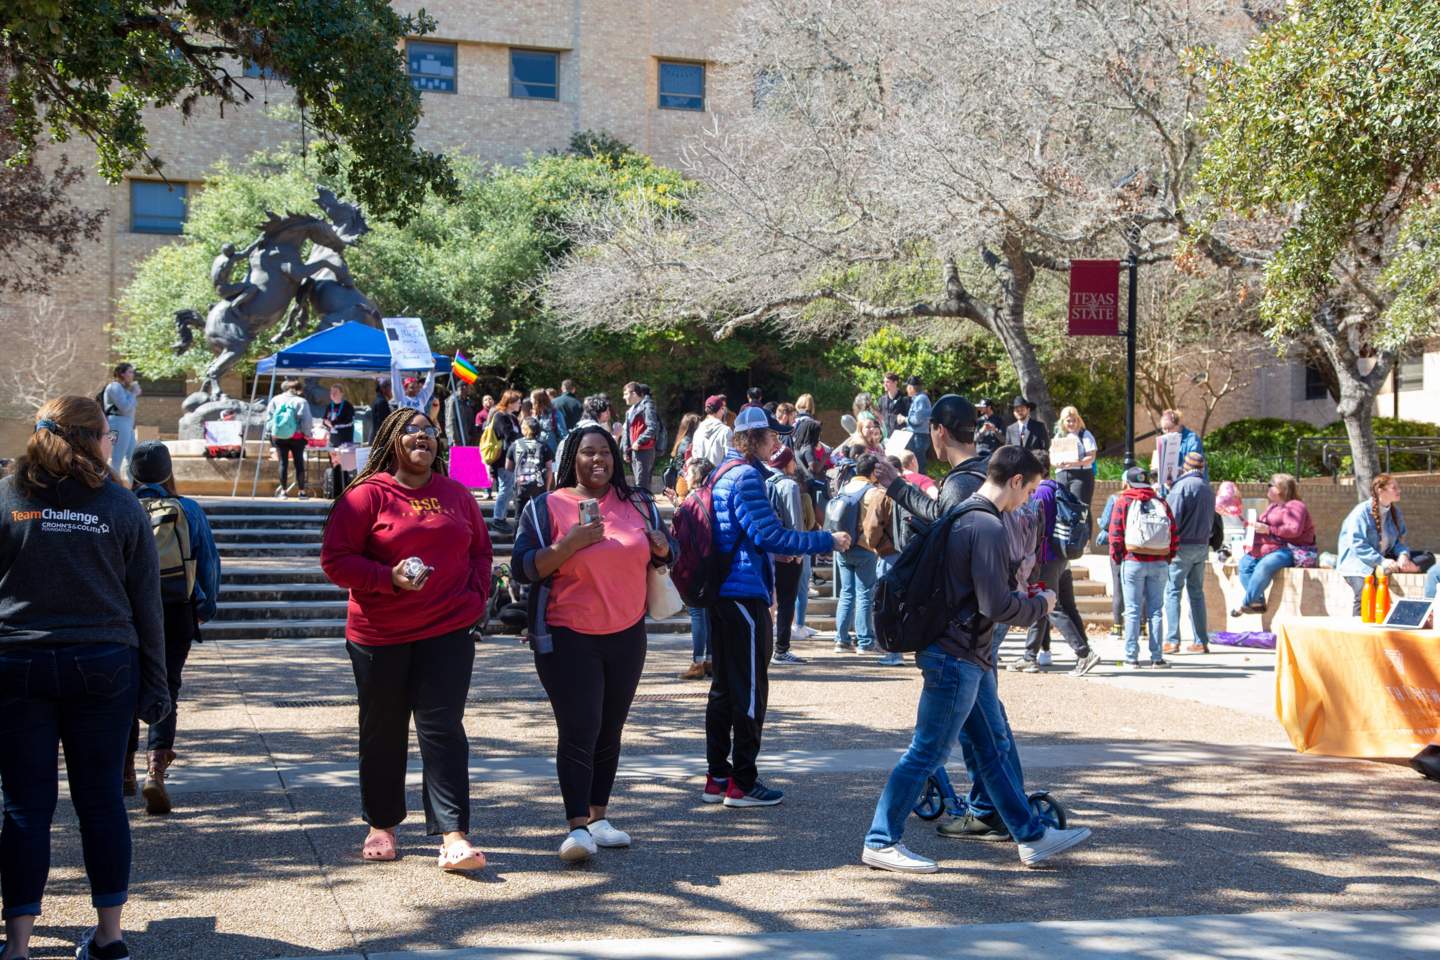 students walking in the quad area on campus near the stallions